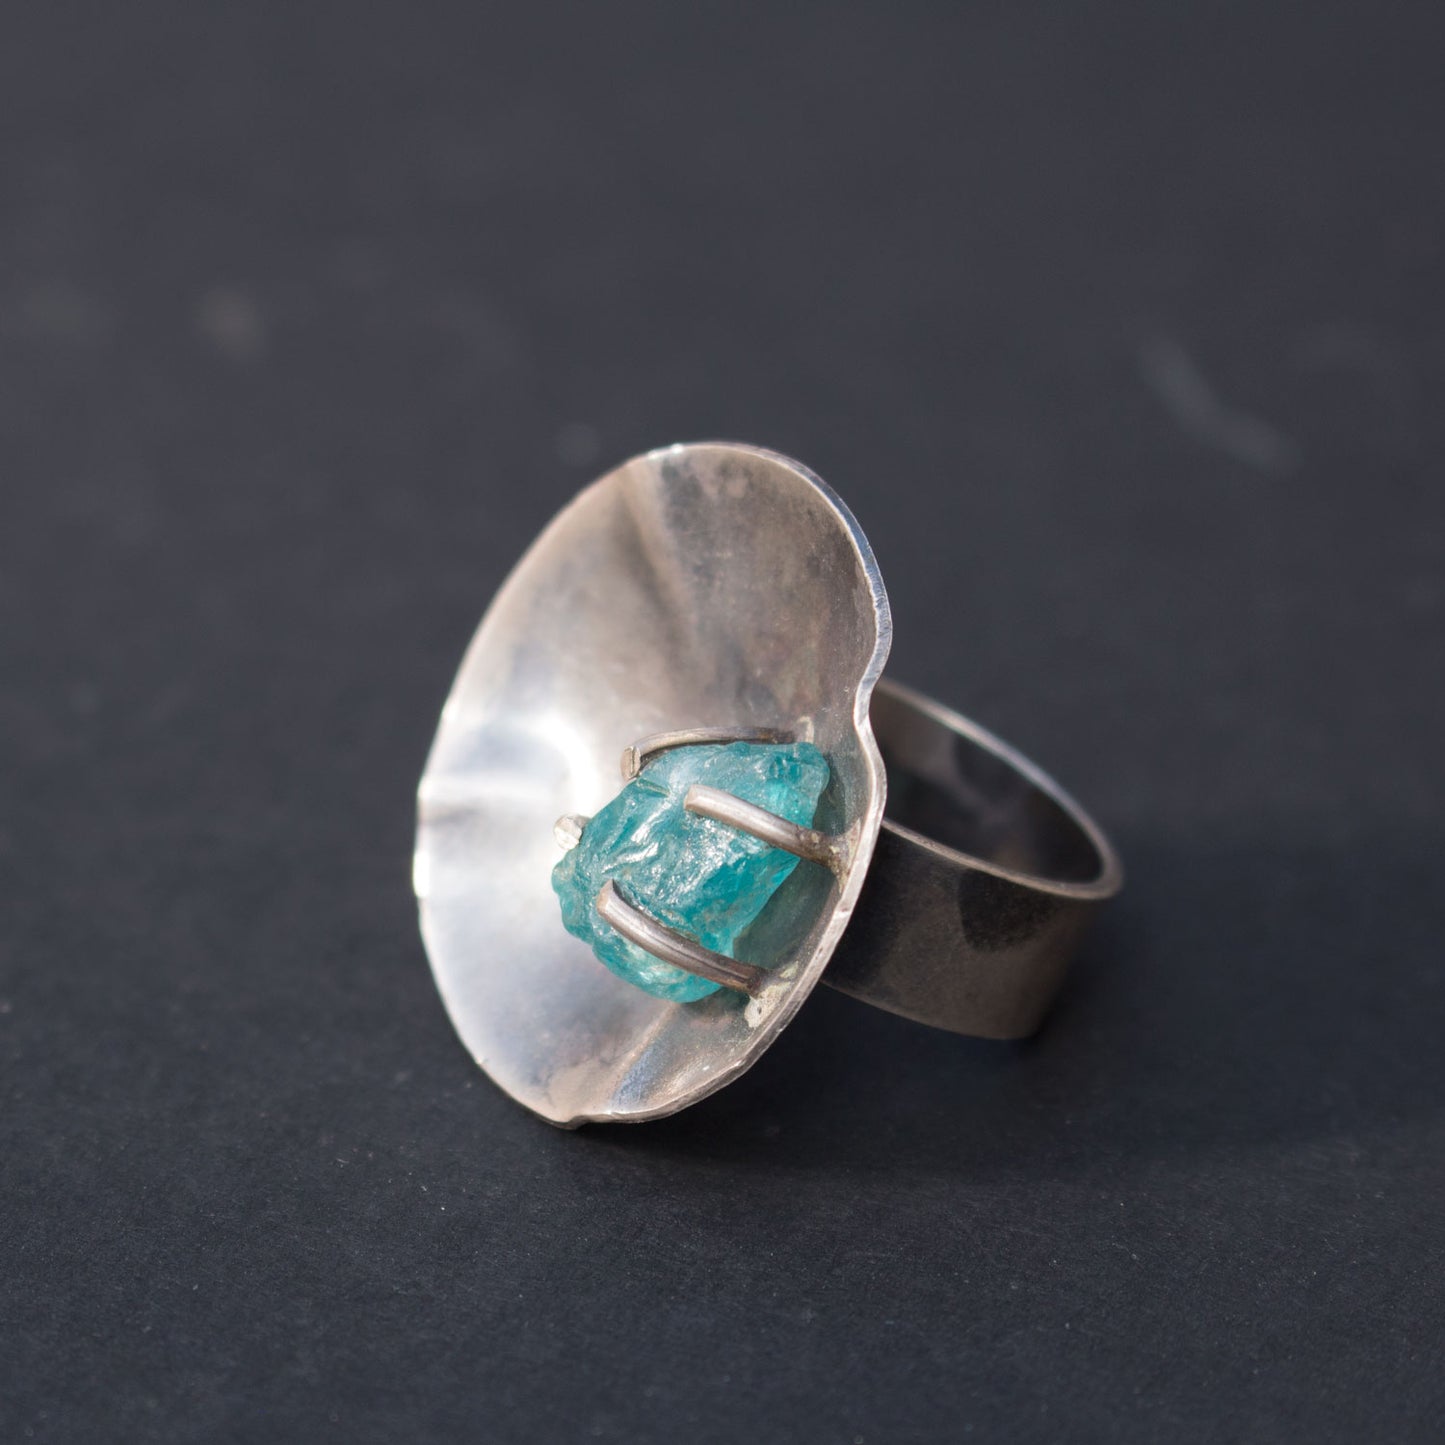 Blue Apatite crystal sterling silver ring